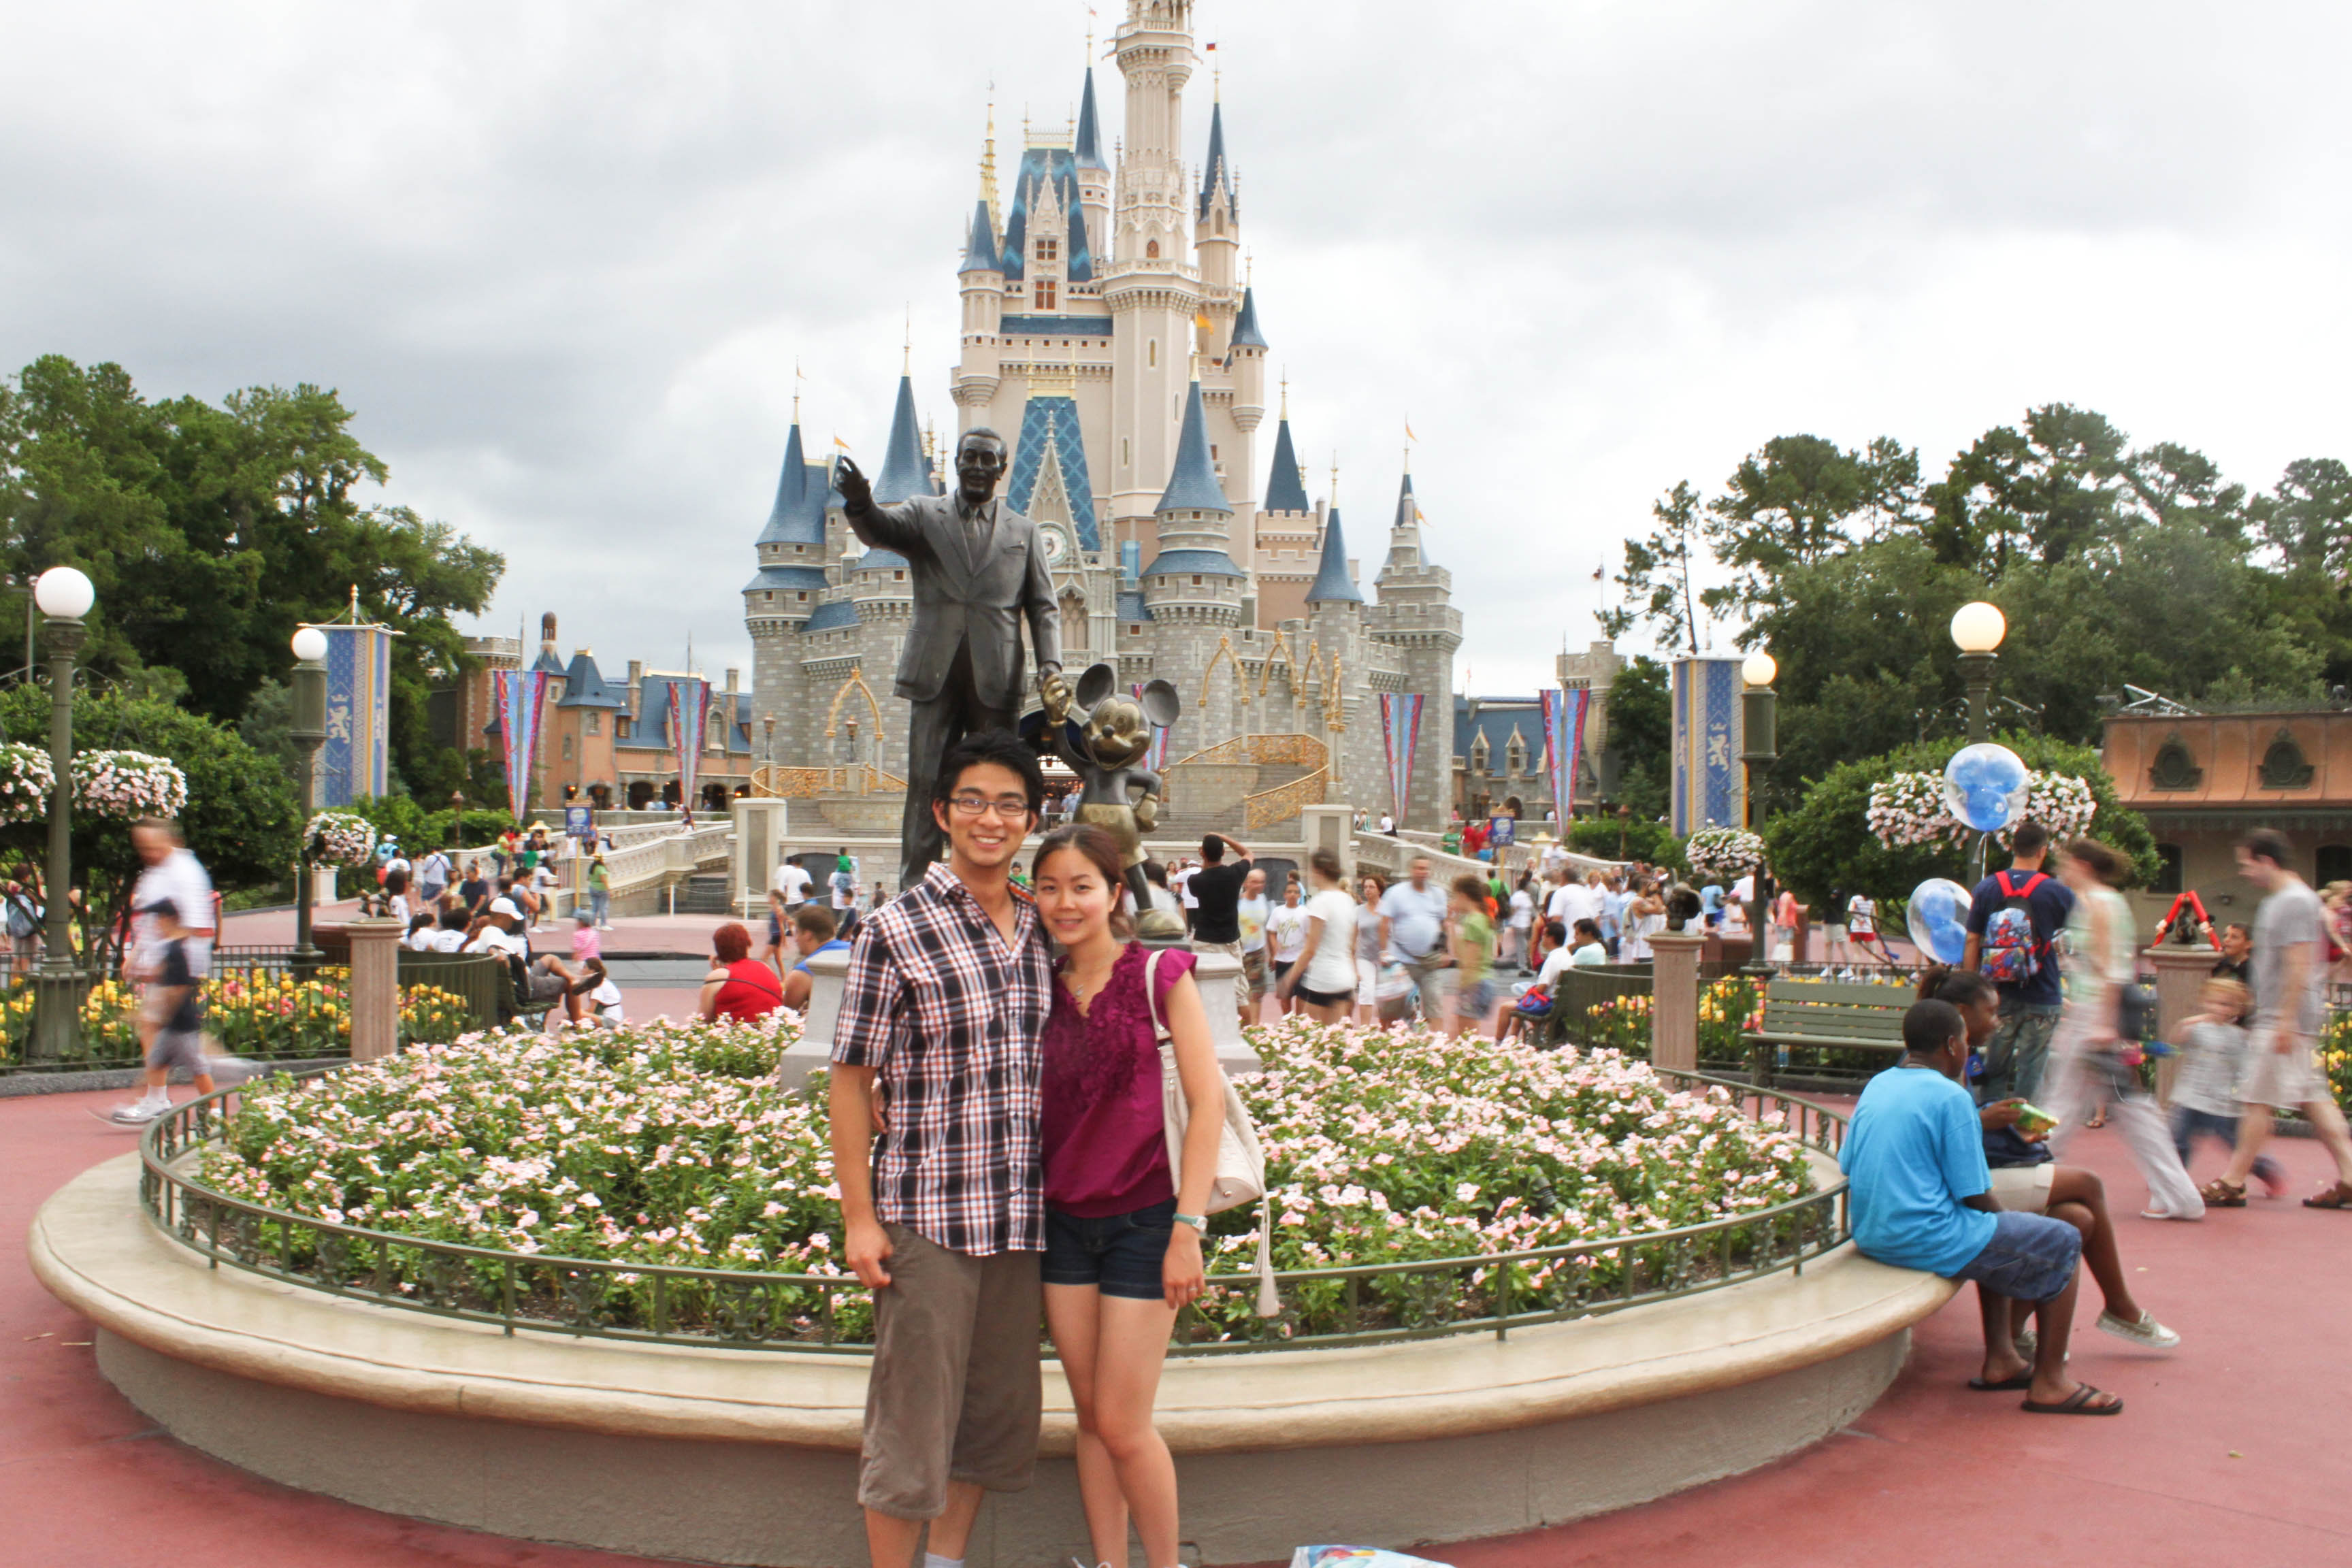 None better than the grand daddy of all theme parks: Walt Disney world, Flo...